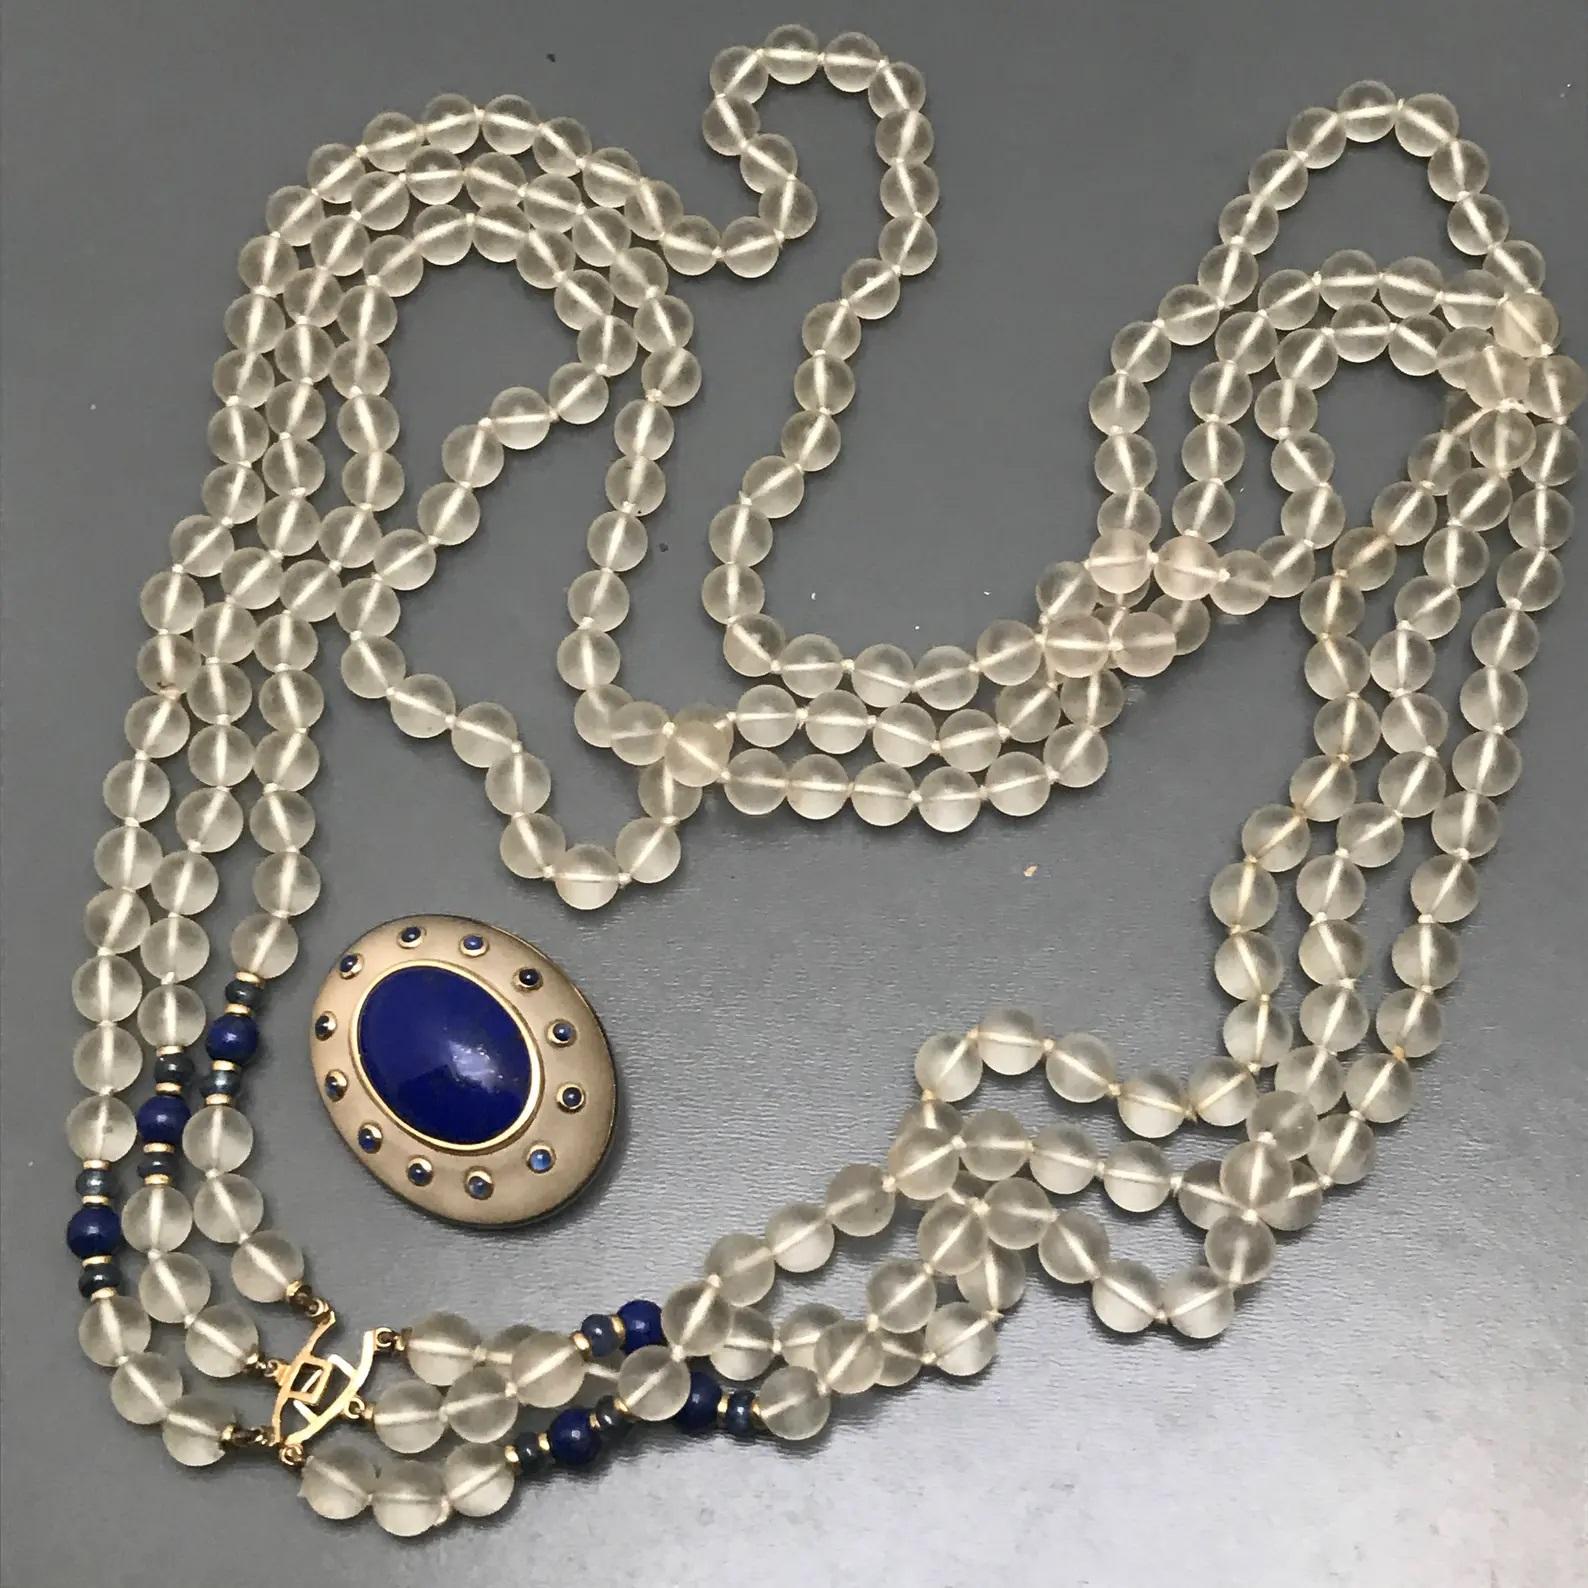  Highly Collectible Vintage  Signed  Trianon Frosted Crystal ,  Gold Multi Strand Necklace  with removable pin /brooch . The central pendant can be easily removed an worn as a pin , featuring a large frosted rock crystal , with tiny genuine